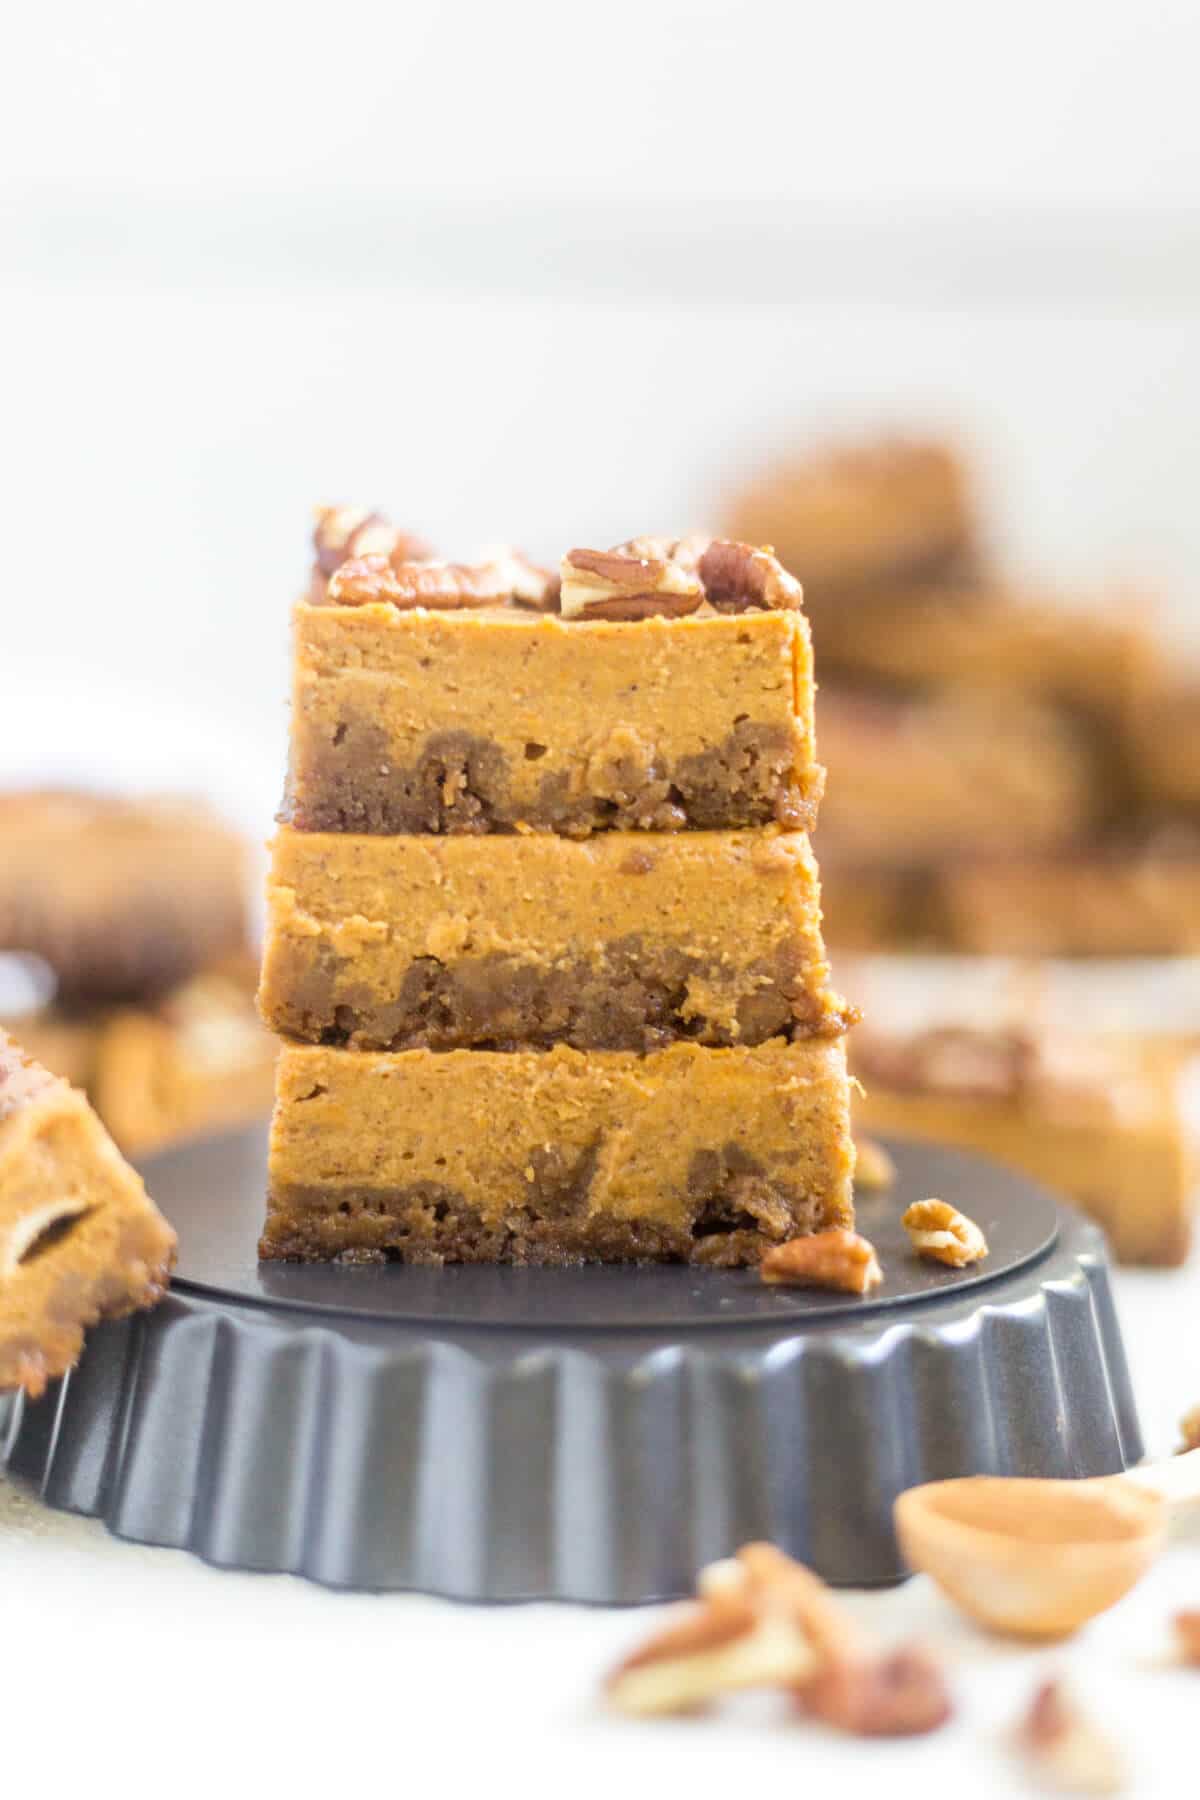 Pumpkin pie bars are a fun twist on a classic Thanksgiving recipe! The crust is made from crushed gingerbread and the bars are just like pumpkin pie and topped with pecans, caramel, ice cream and more!